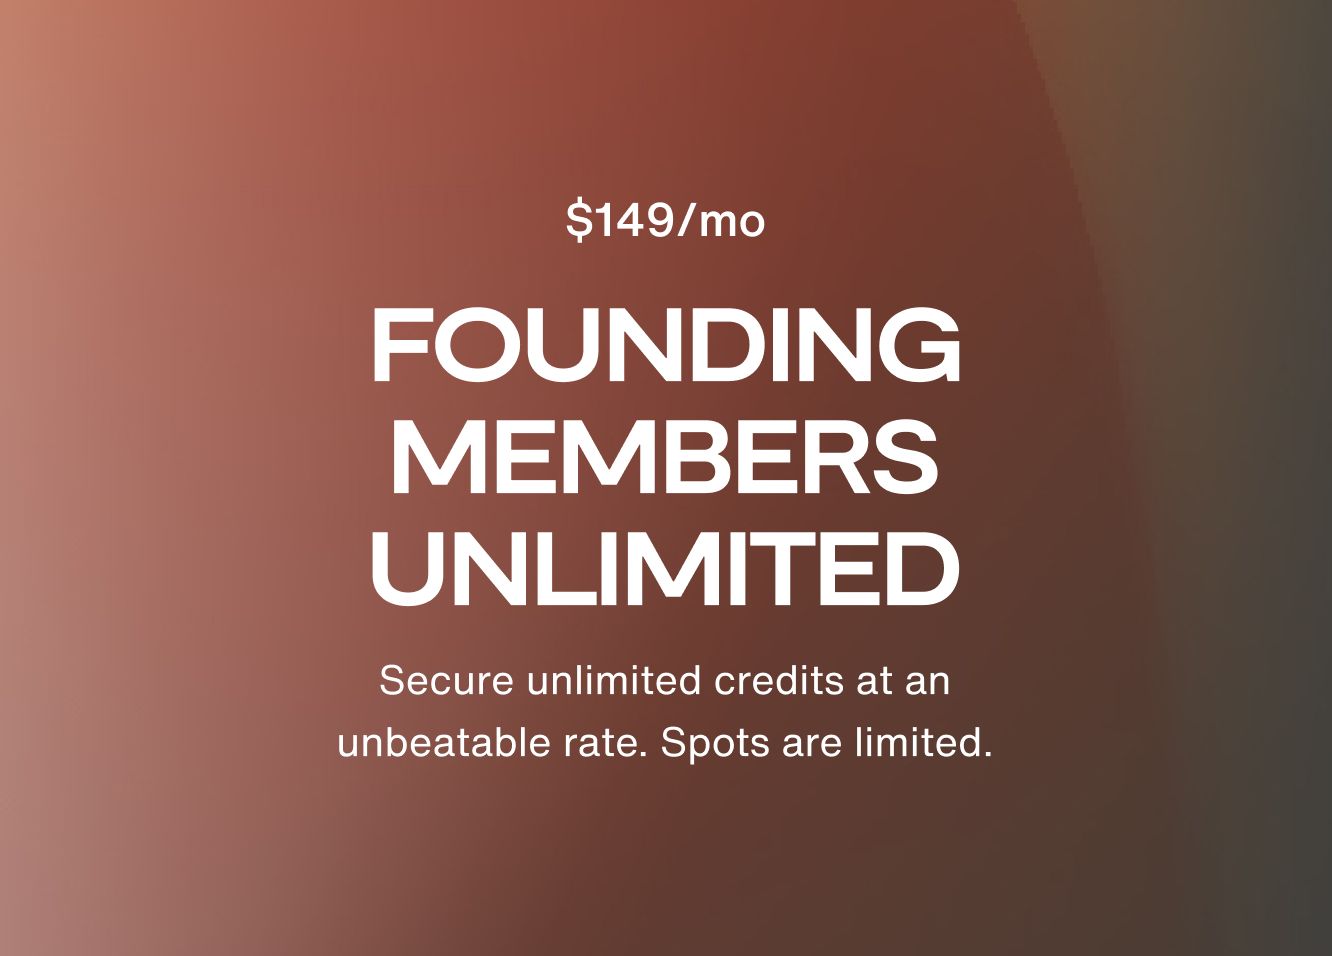 Founding Members Unlimited - Secure unlimited credits at an unbeatable rate. Spots are limited.